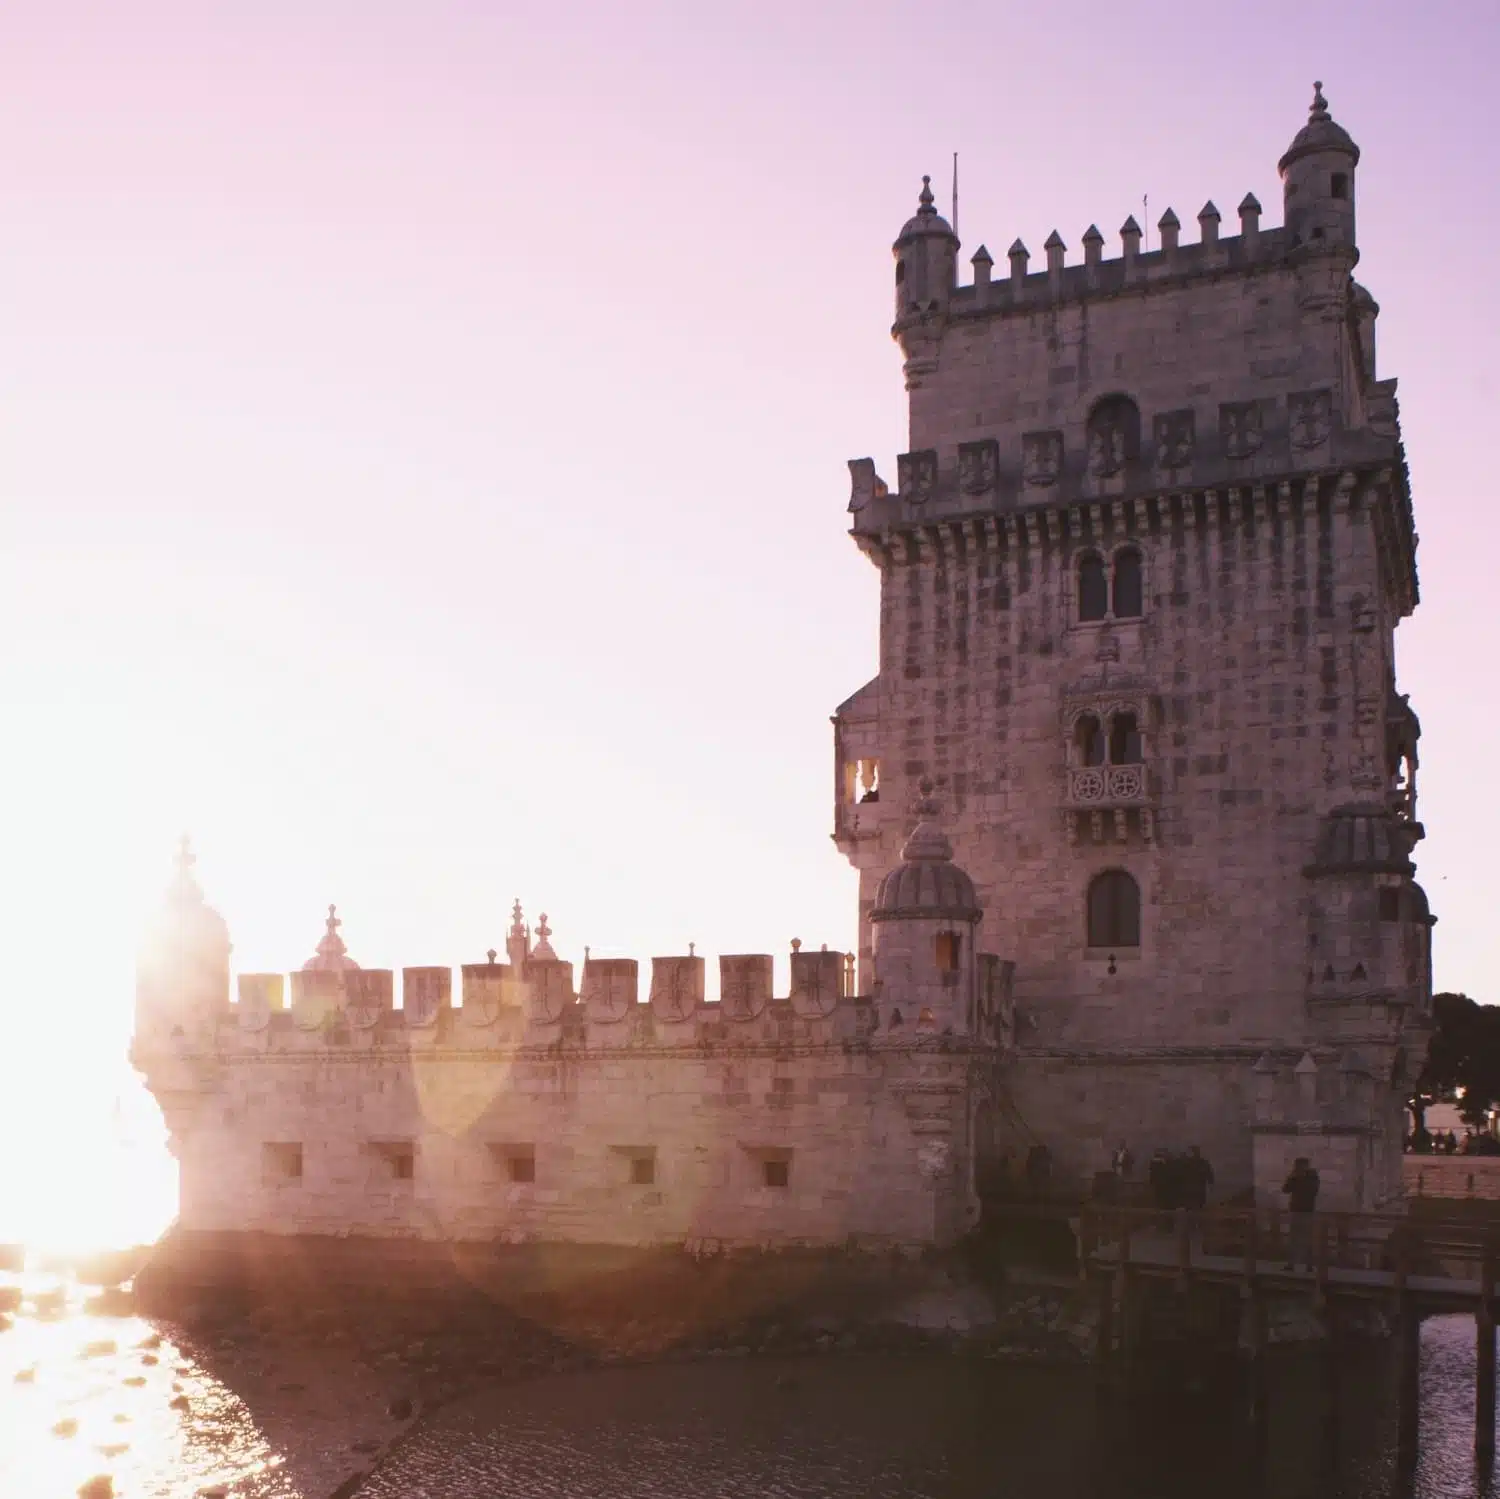 Belem Tower or the Torre de Belem - One of the top things to do in Lisbon, Portugal